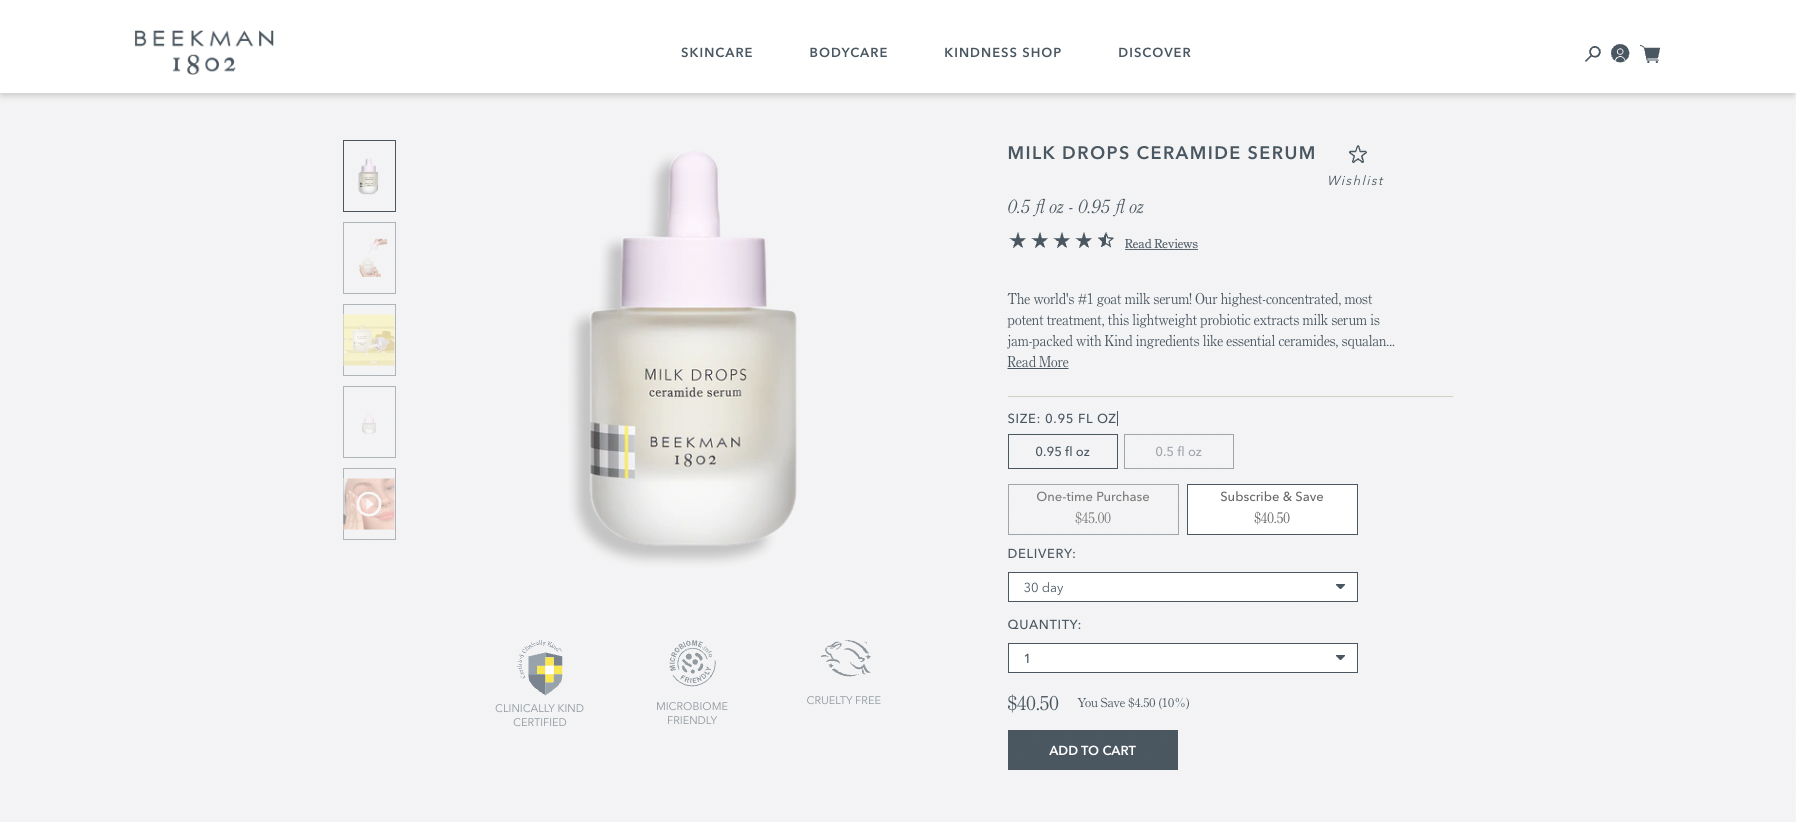 A screenshot of the MILK DROPS CERAMIDE SERUM product page on Beekman 1802 that offers a subscription option